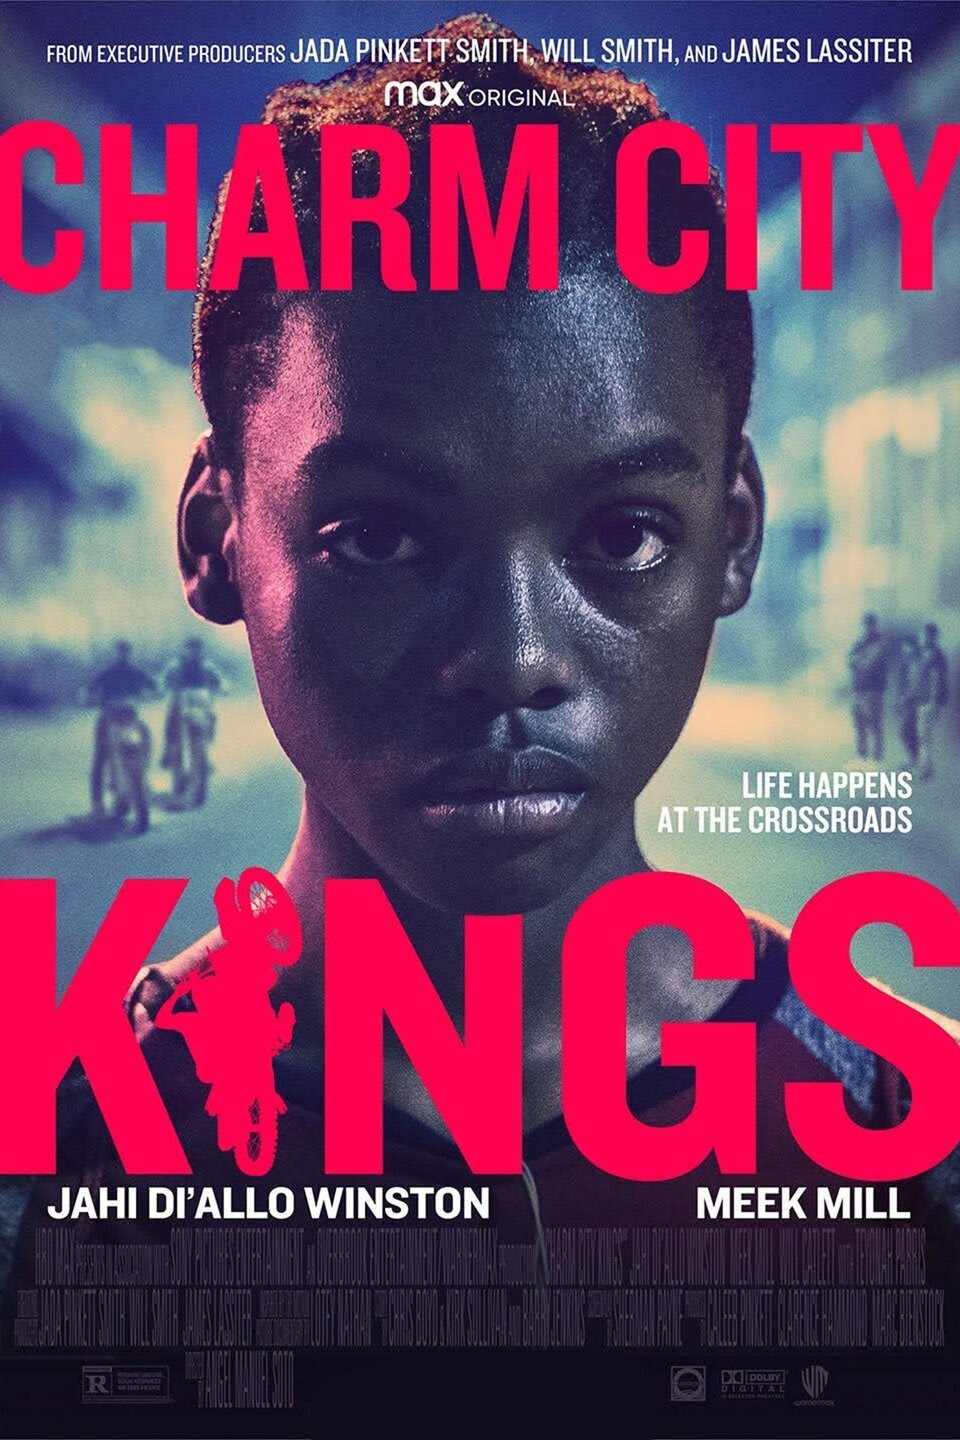 charm city kings poster